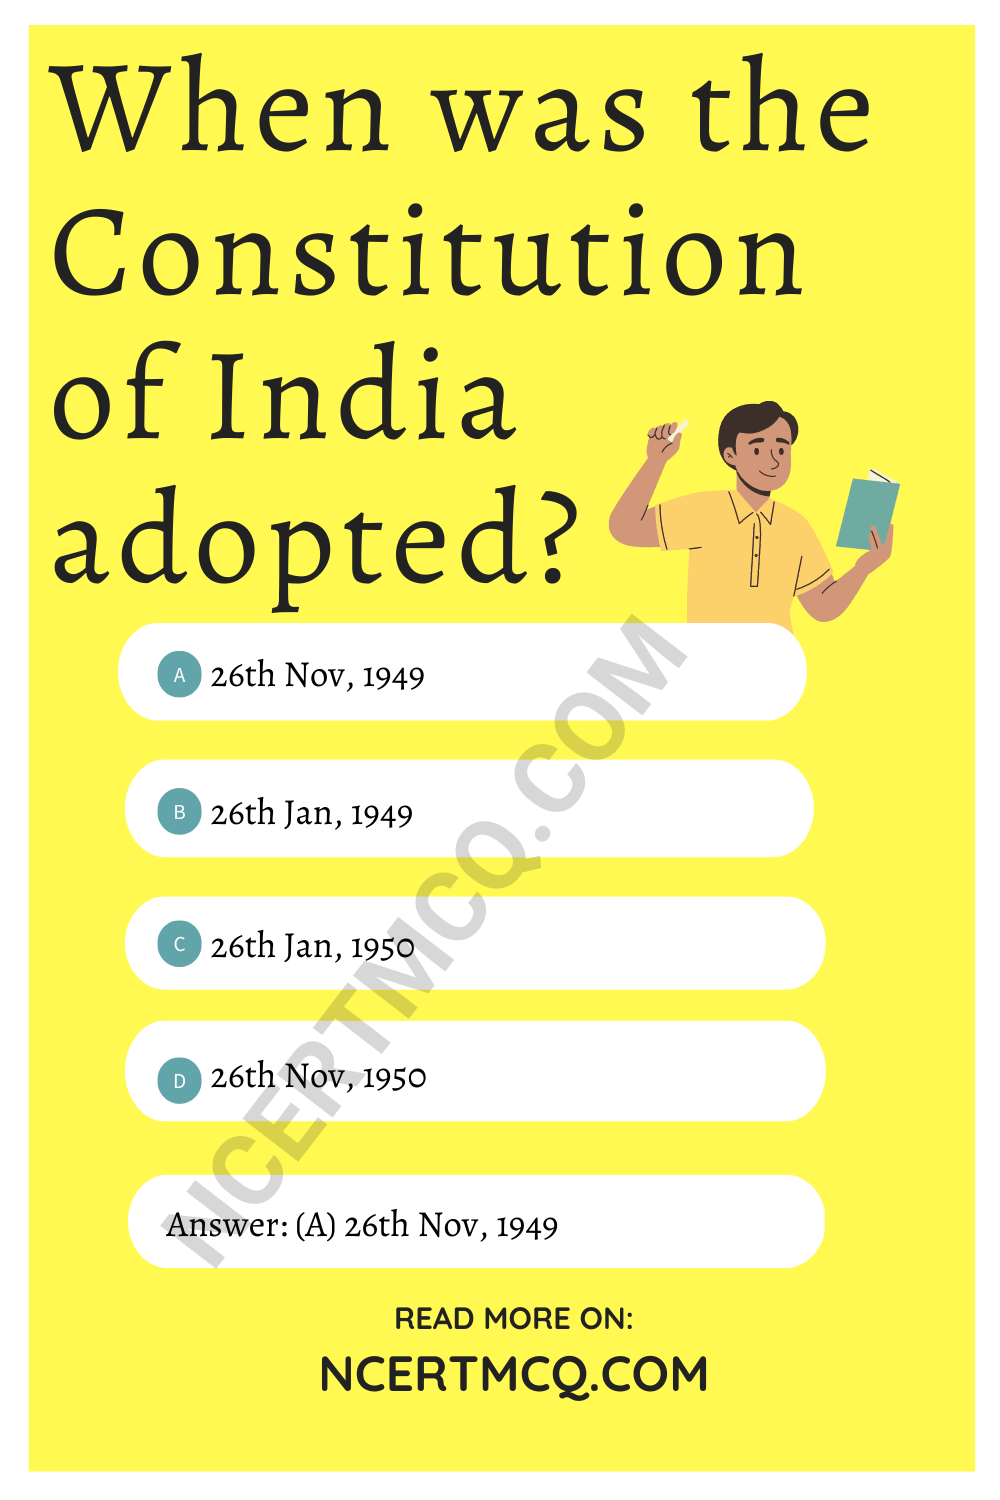 When was the Constitution of India adopted?